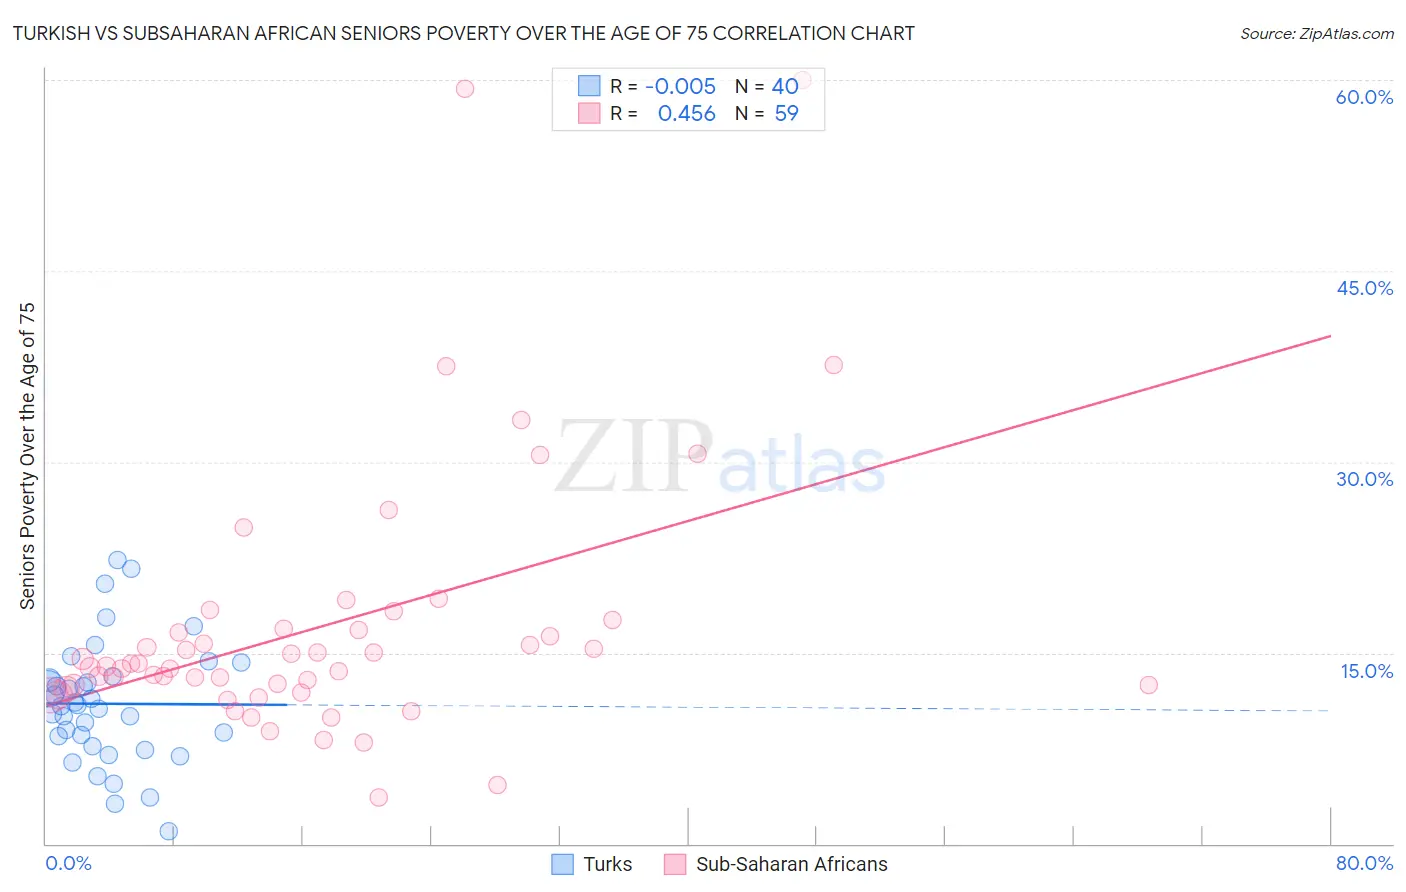 Turkish vs Subsaharan African Seniors Poverty Over the Age of 75